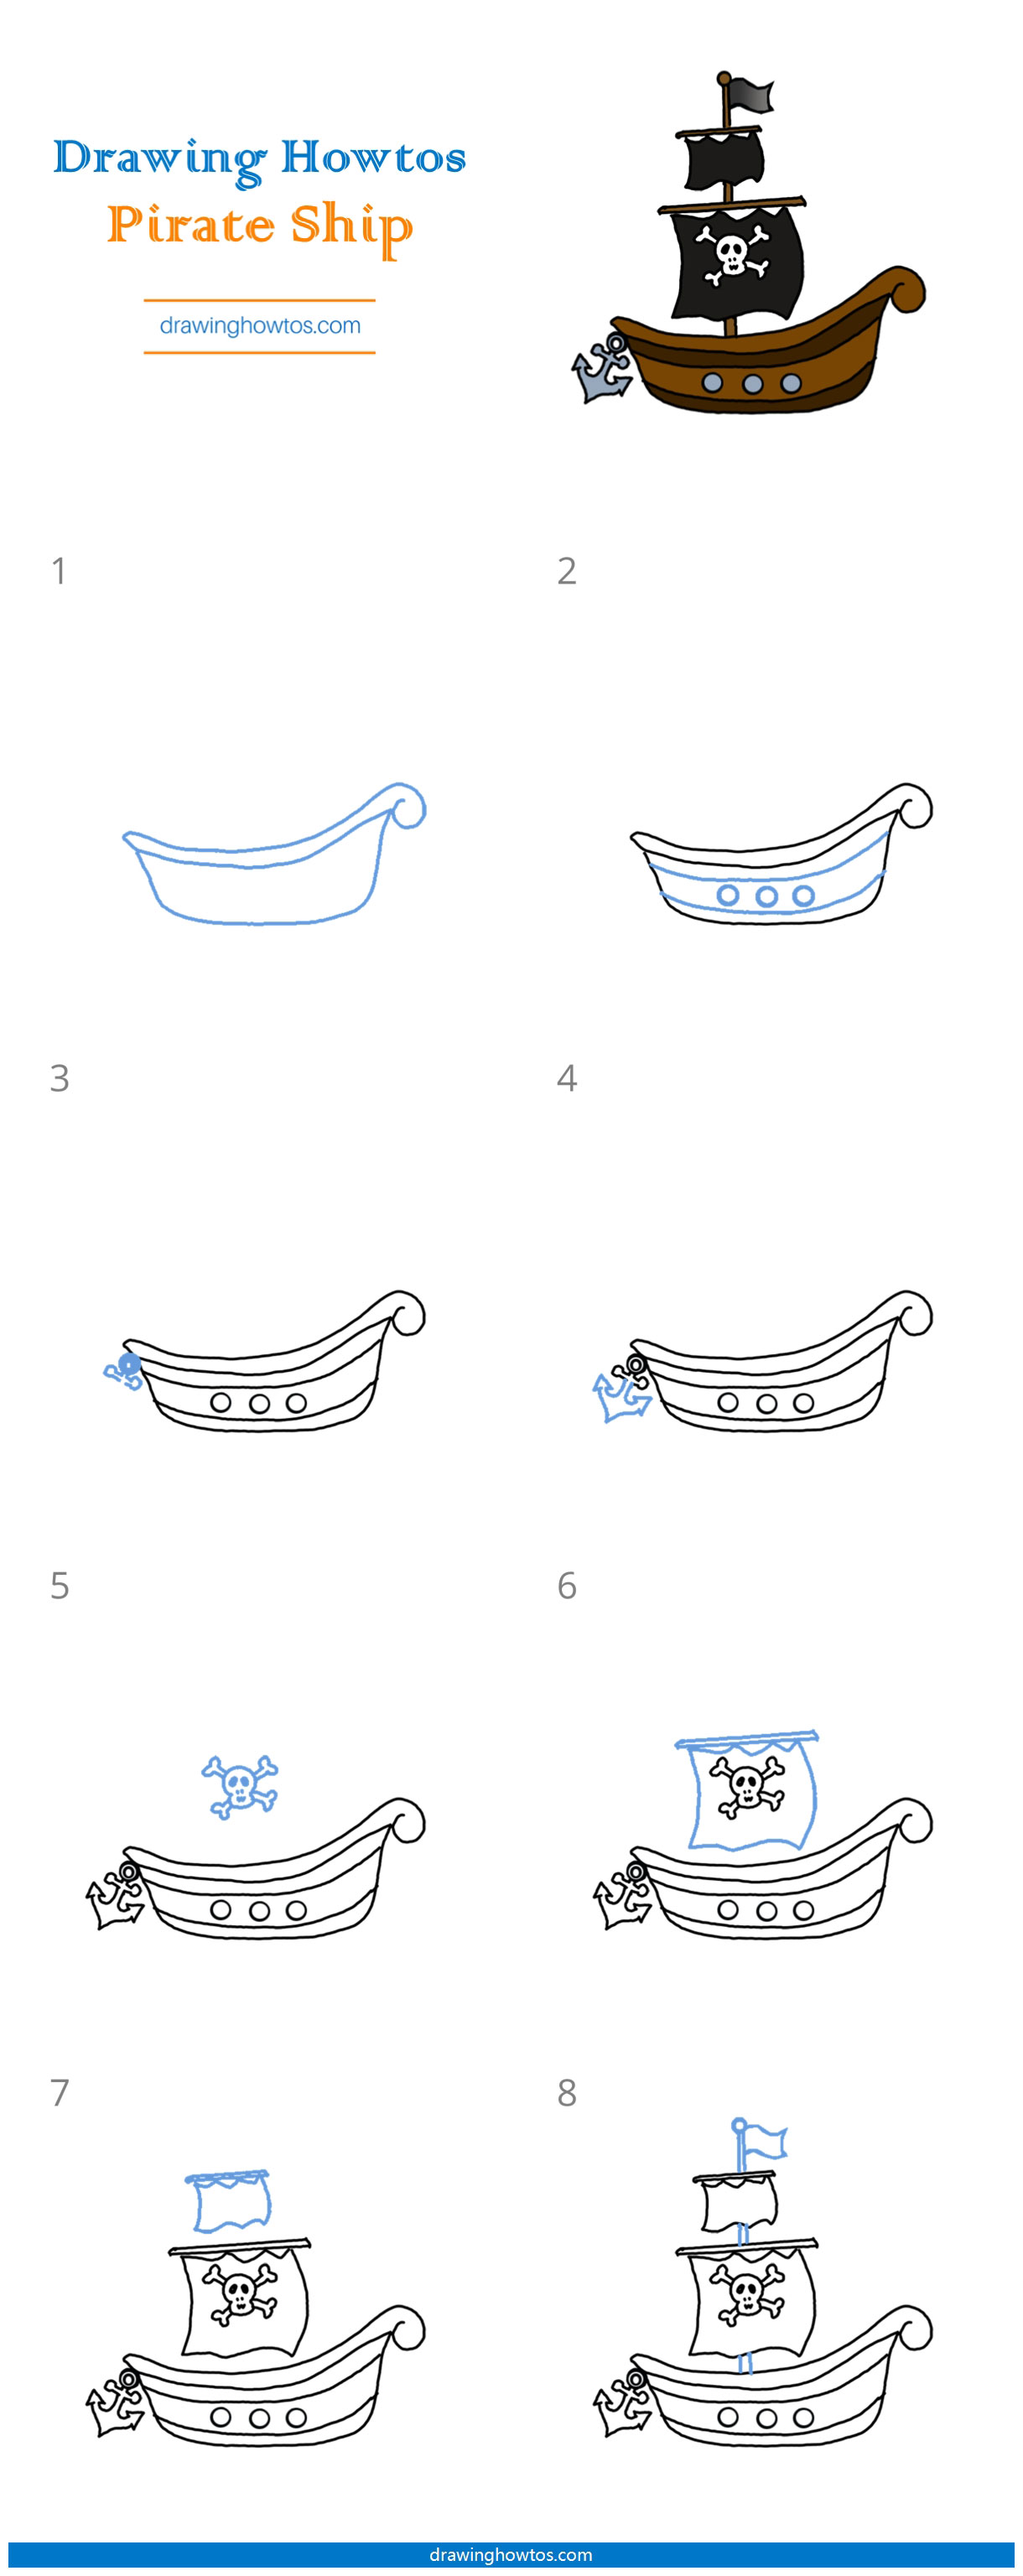 How to Draw a Pirate Ship Step by Step